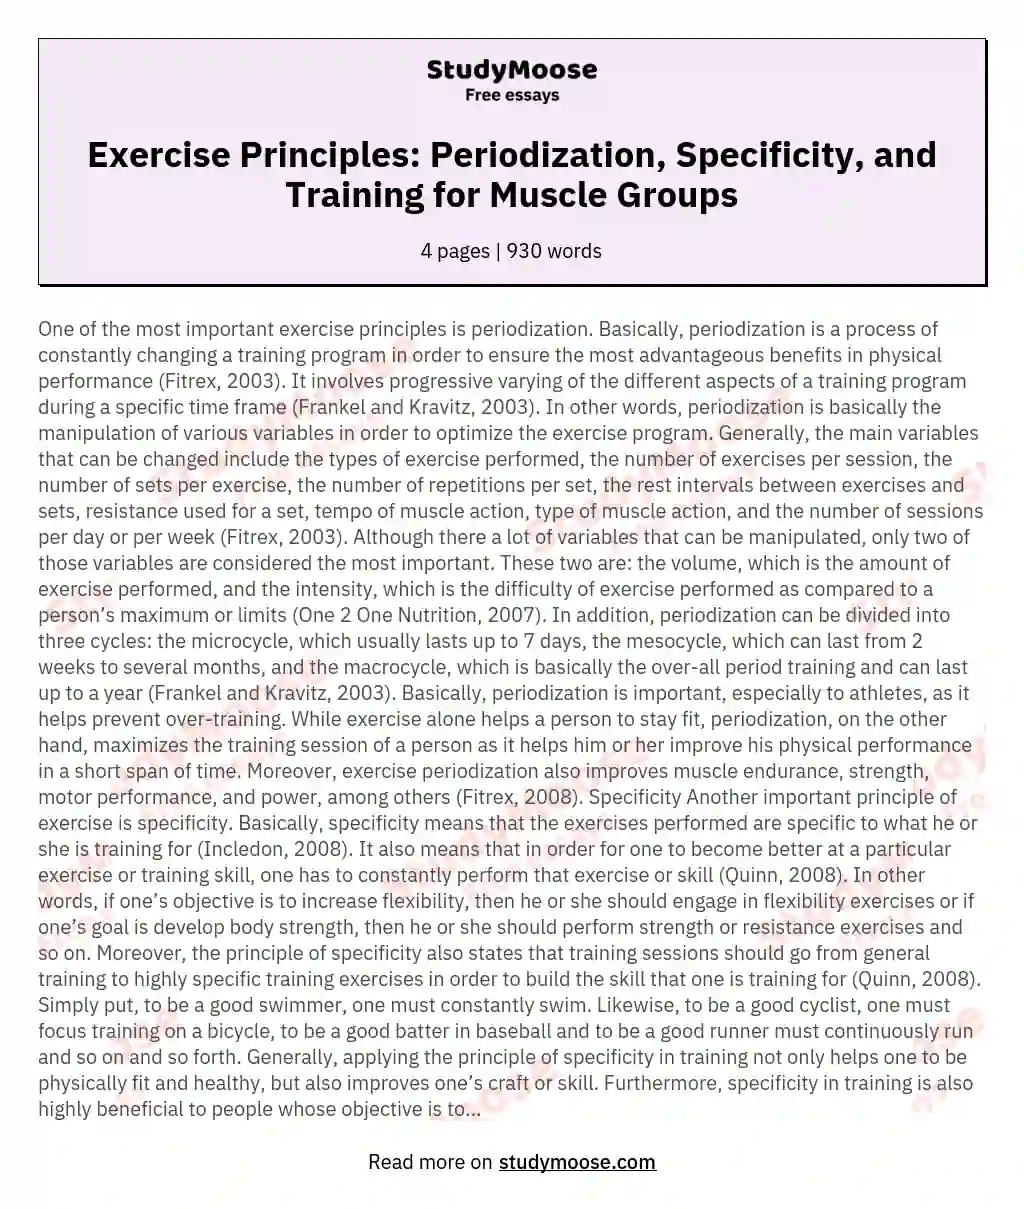 Exercise Principles: Periodization, Specificity, and Training for Muscle Groups